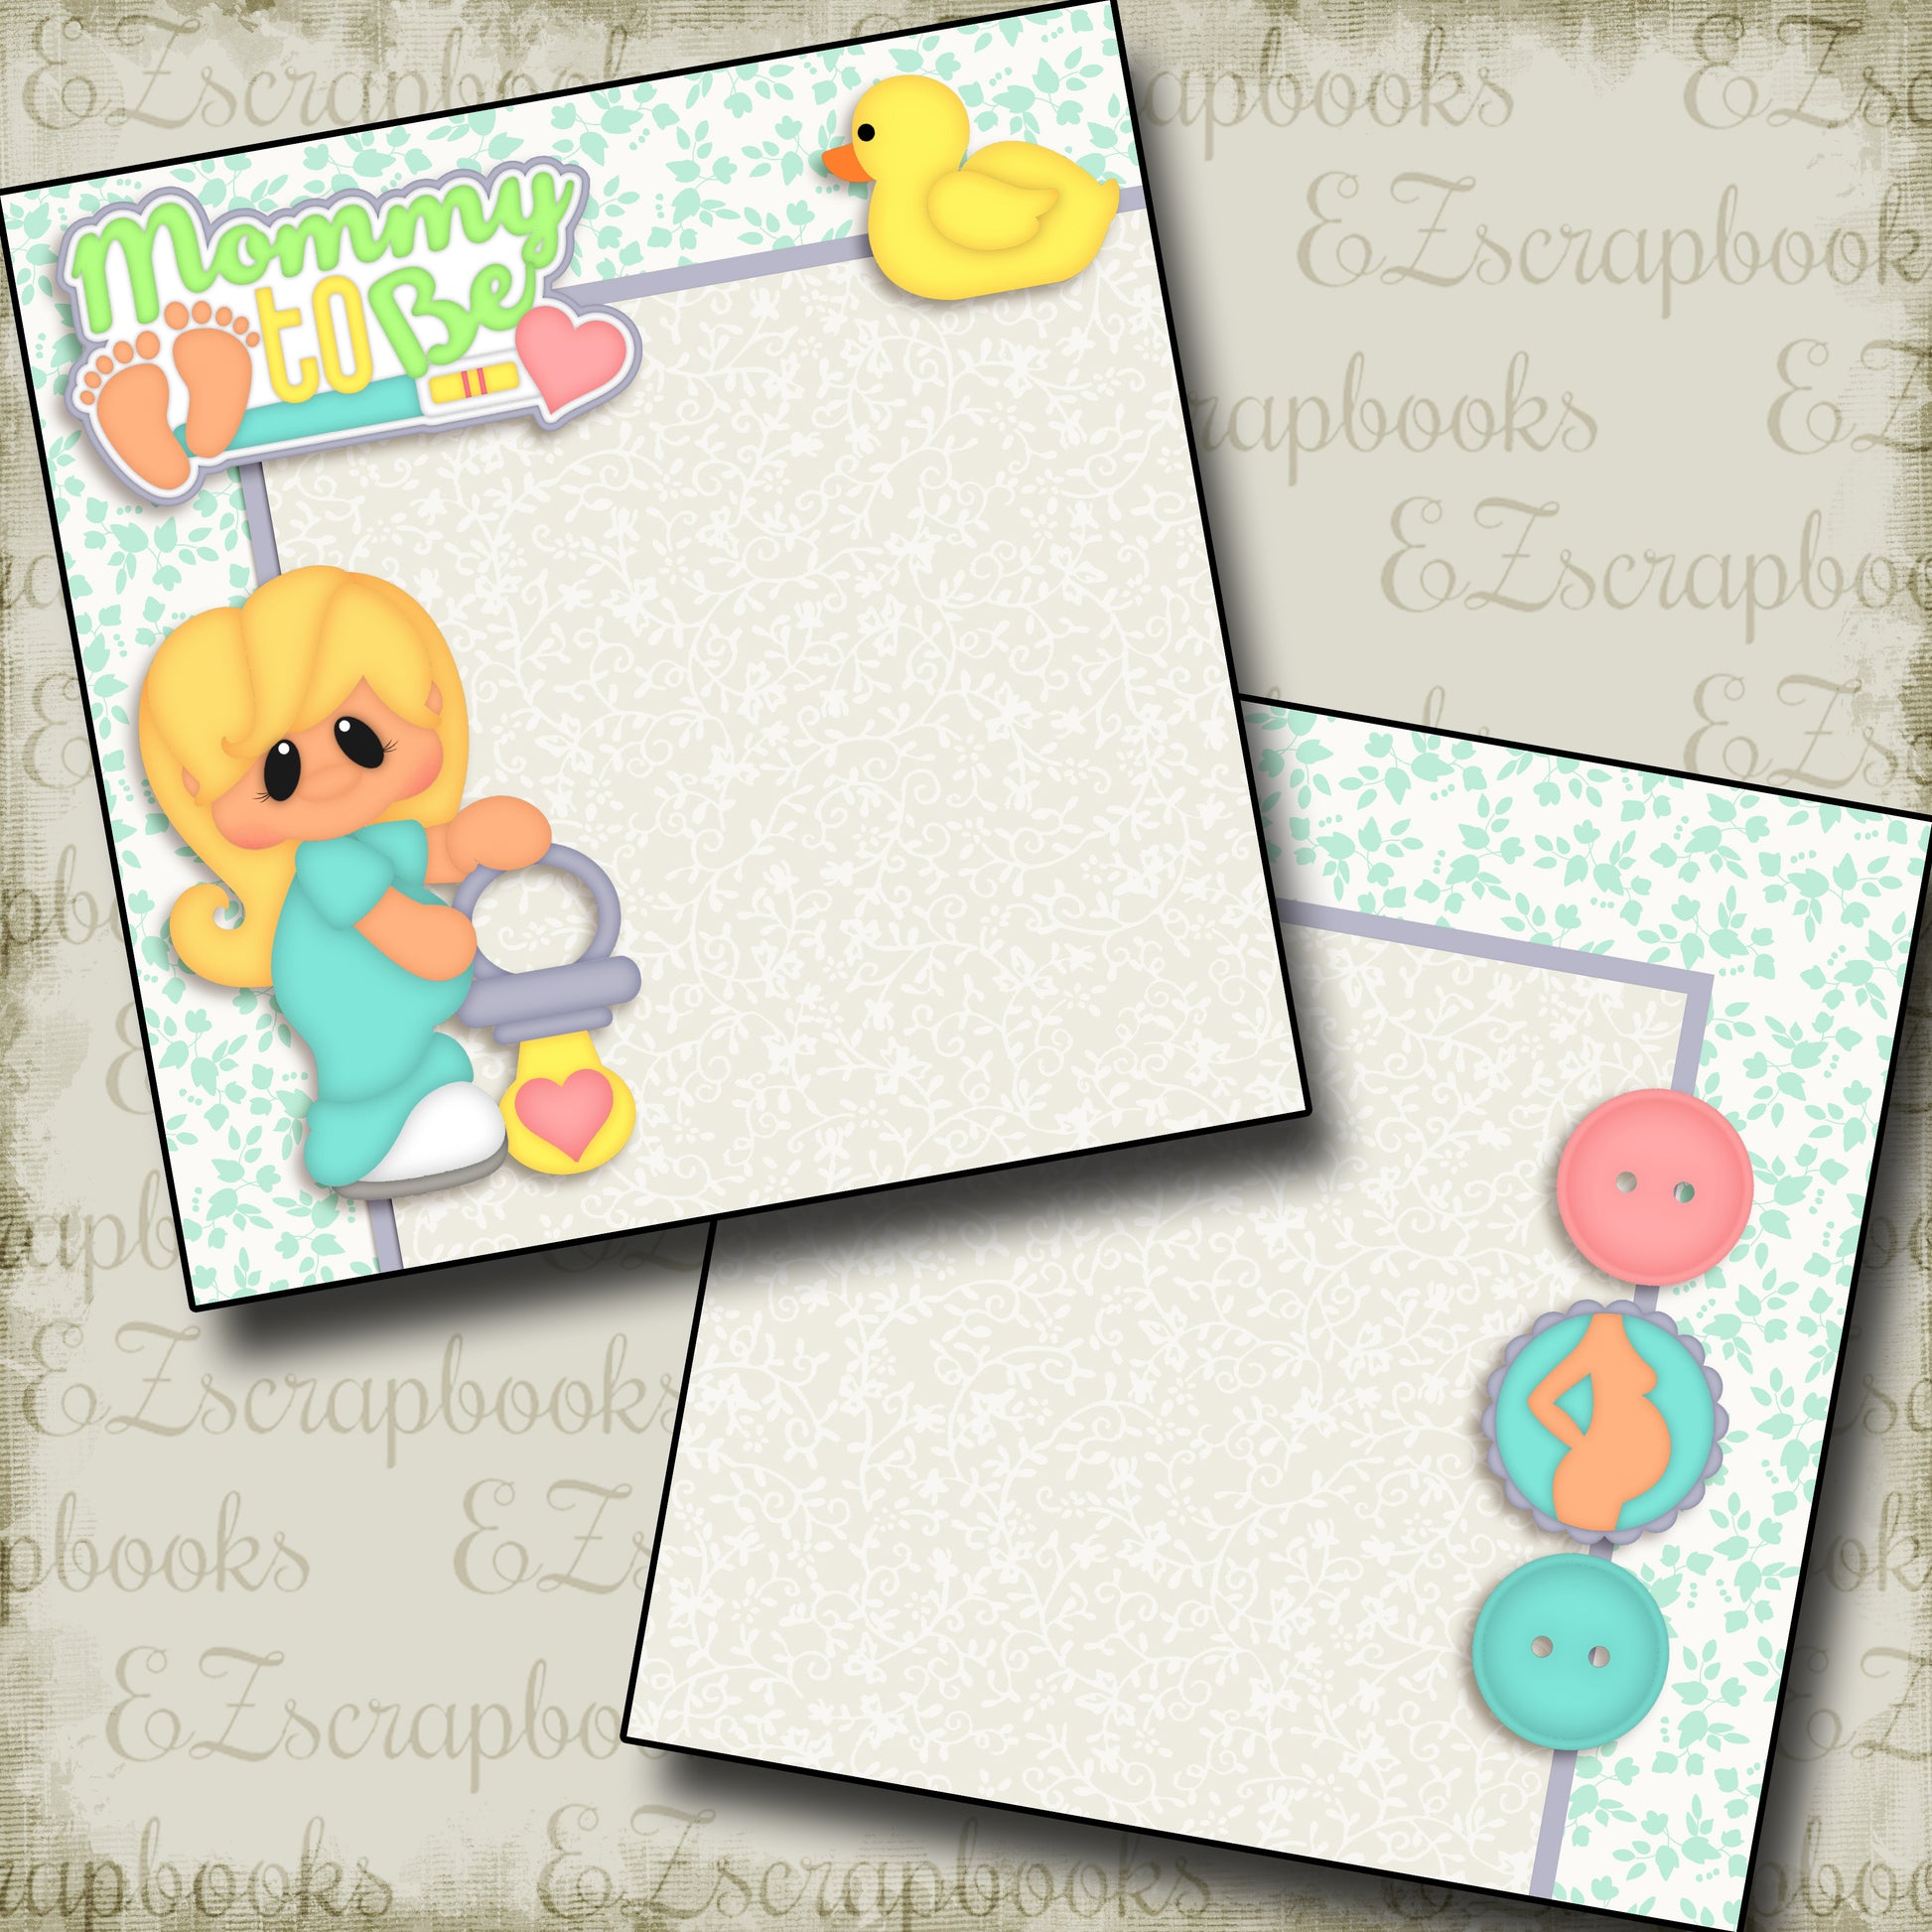 Mommy to Be Blond NPM - 2605 - EZscrapbooks Scrapbook Layouts Baby - Toddler, Pregnancy